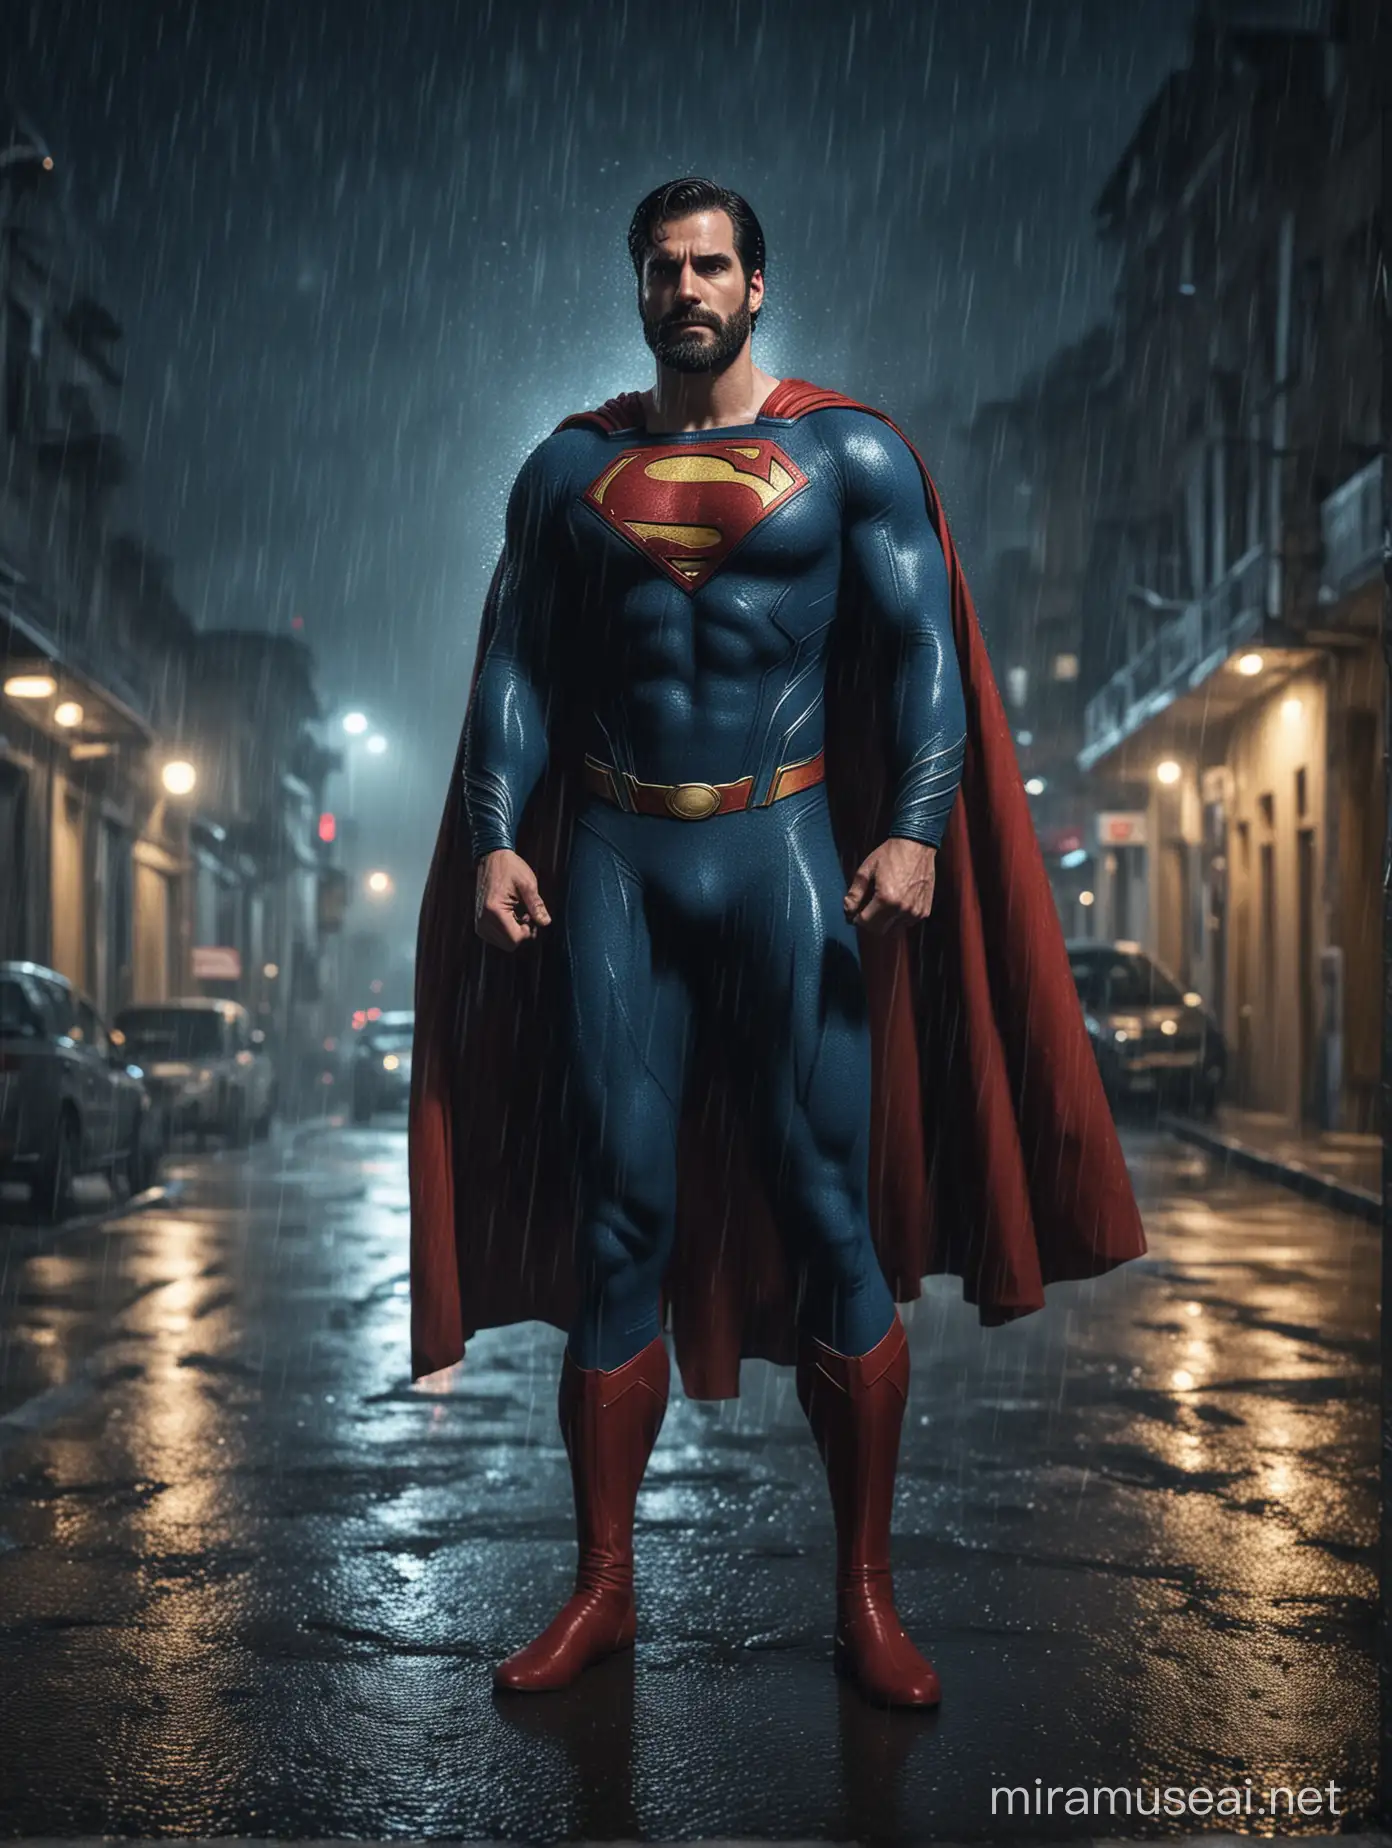 Bearded Superman Stands Strong in Rainy Night Street Scene